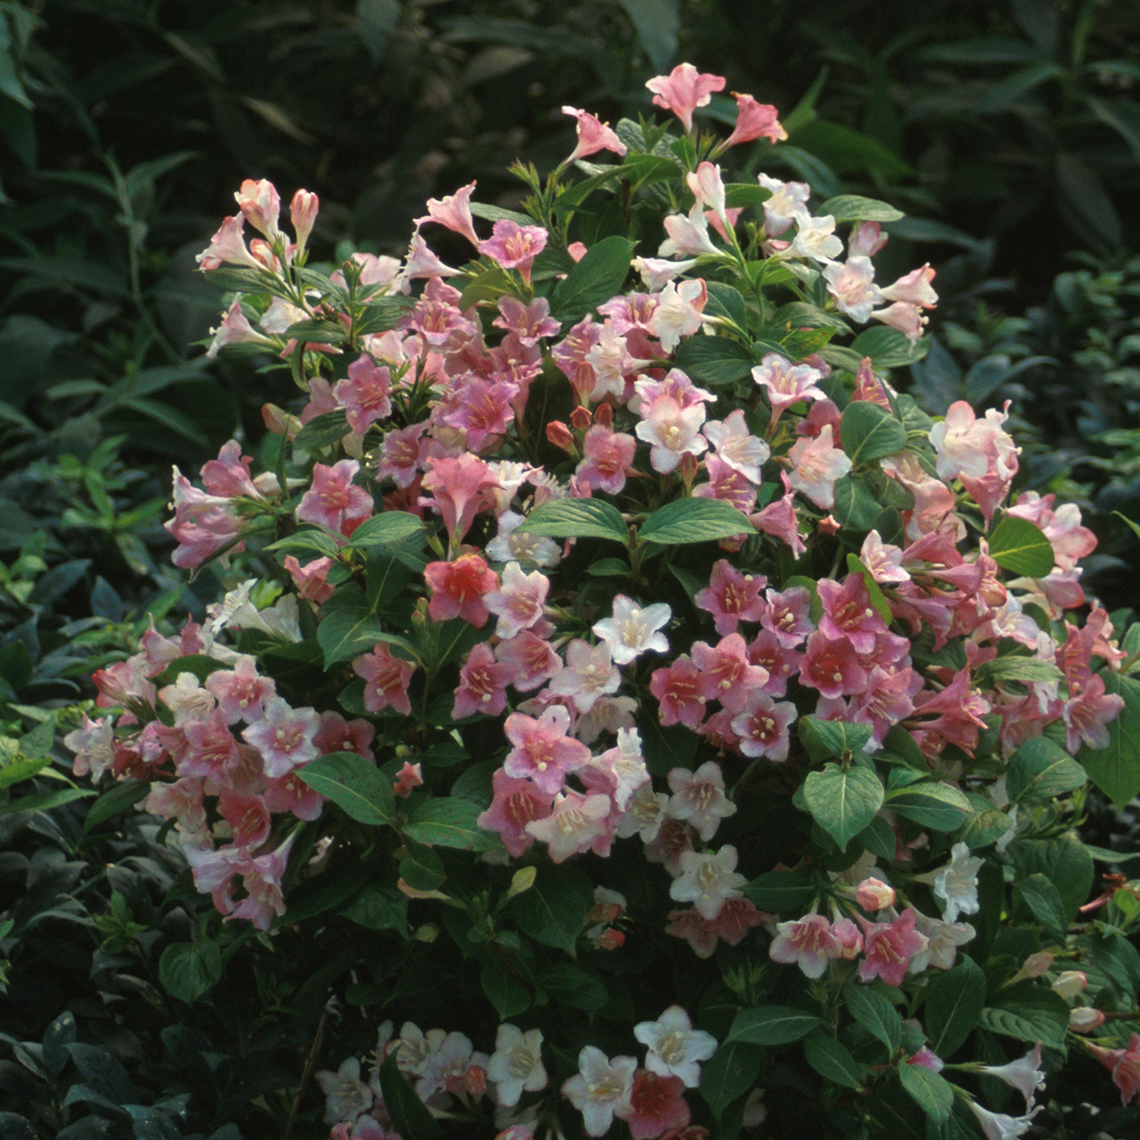 The flowers of Carnavale weigela are three colors white pink and red at once